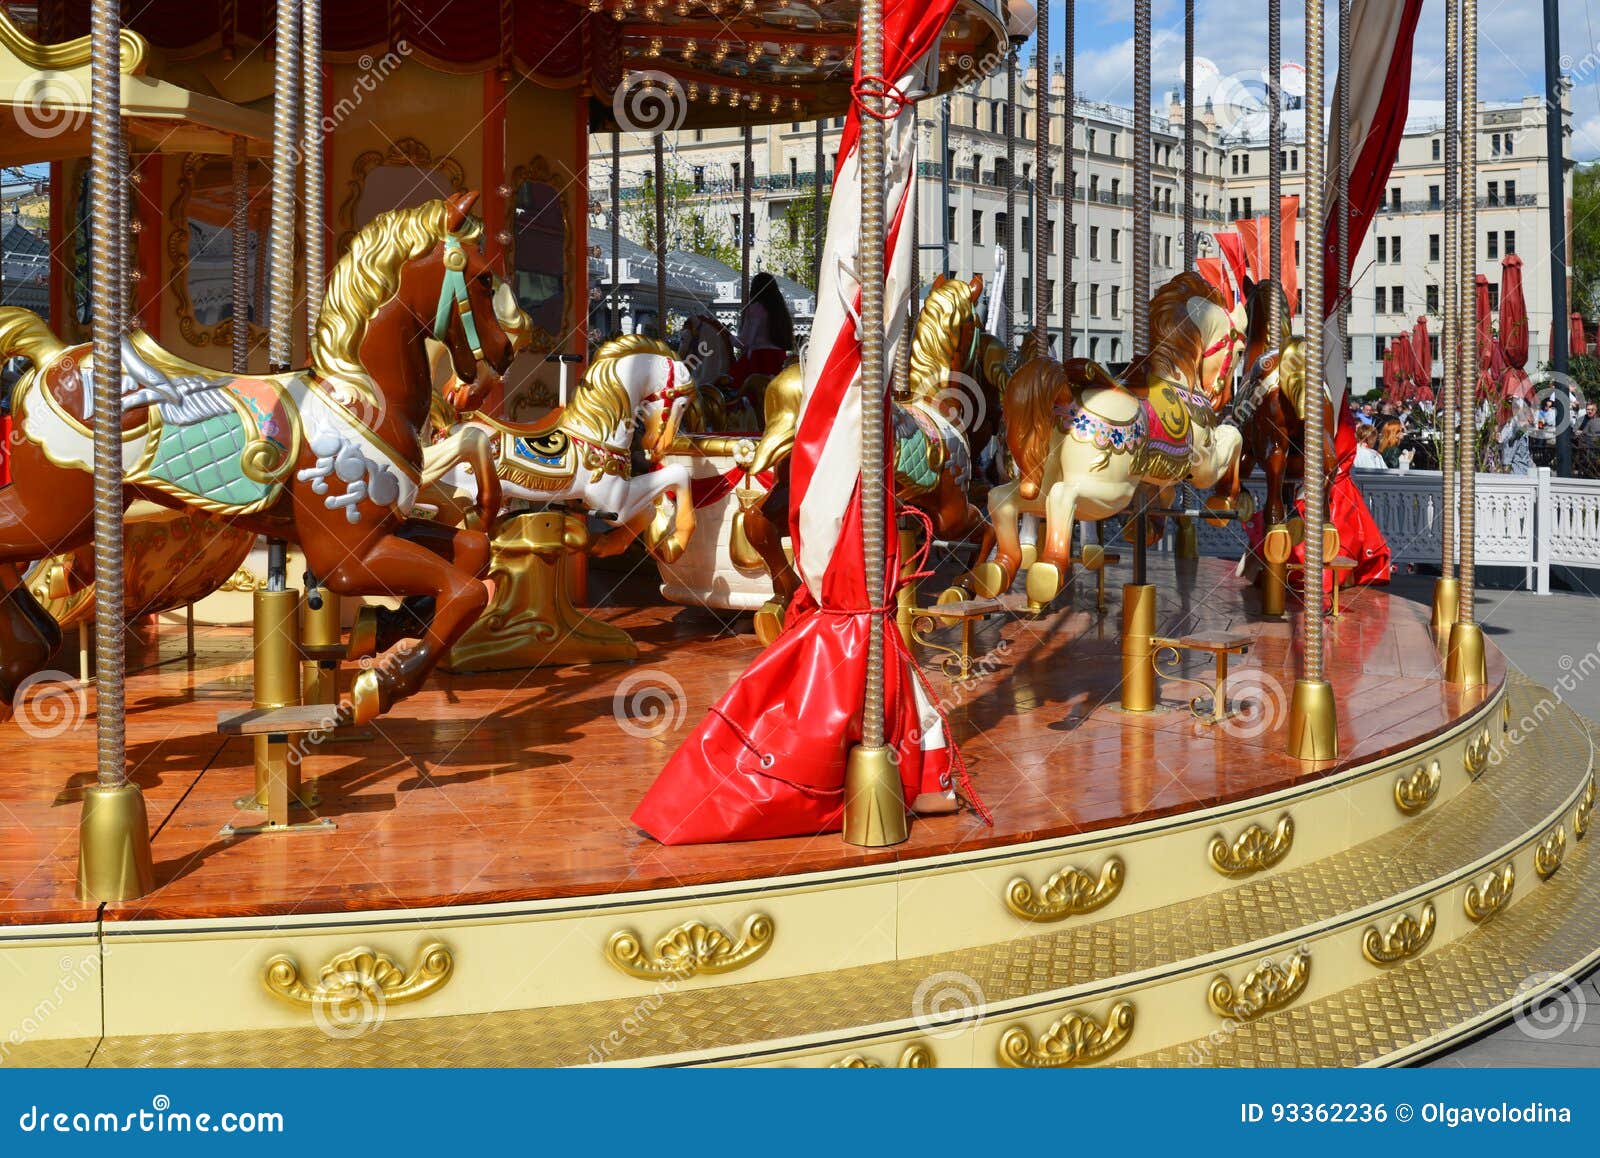 Fragment of a children`s merry-go-round with horses in Moscow, Russia